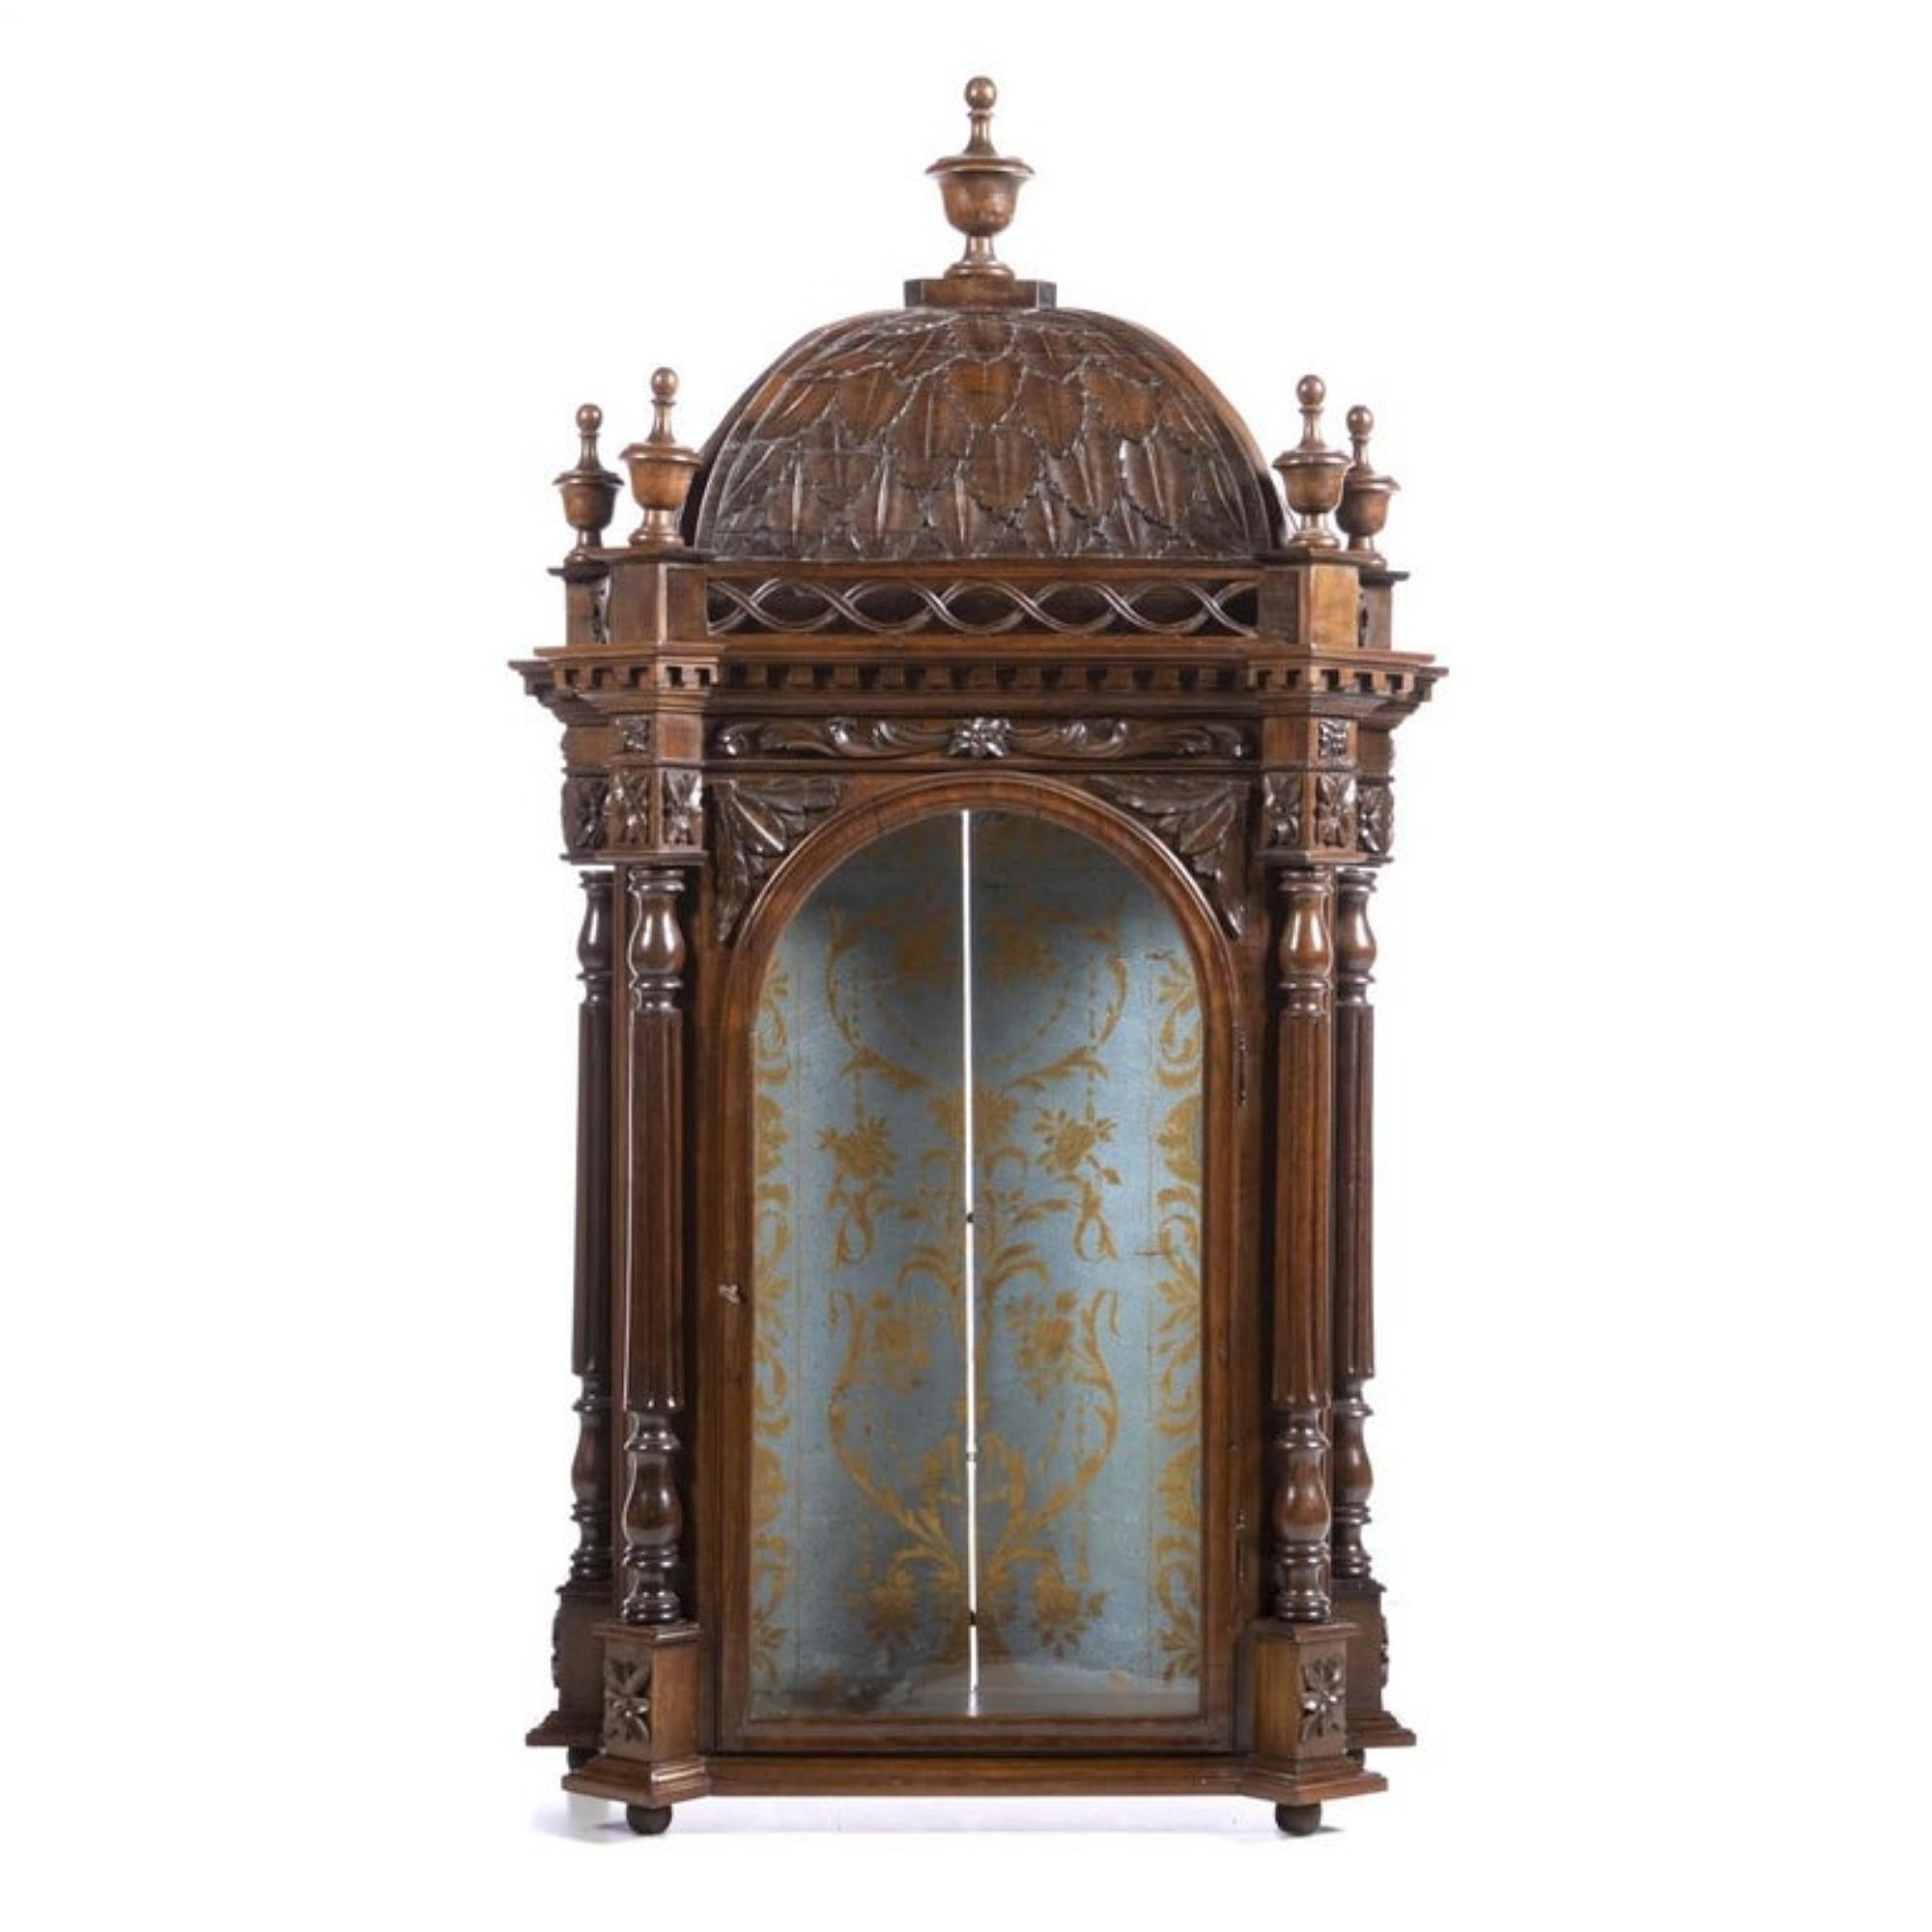 Oratory
Portuguese, 19th century, in carved Brazilian rosewood. Decoration with plant motifs. Glazed doors and sides. Painted and gilded interior. DIM.: 160 x 72 x 34 cm.